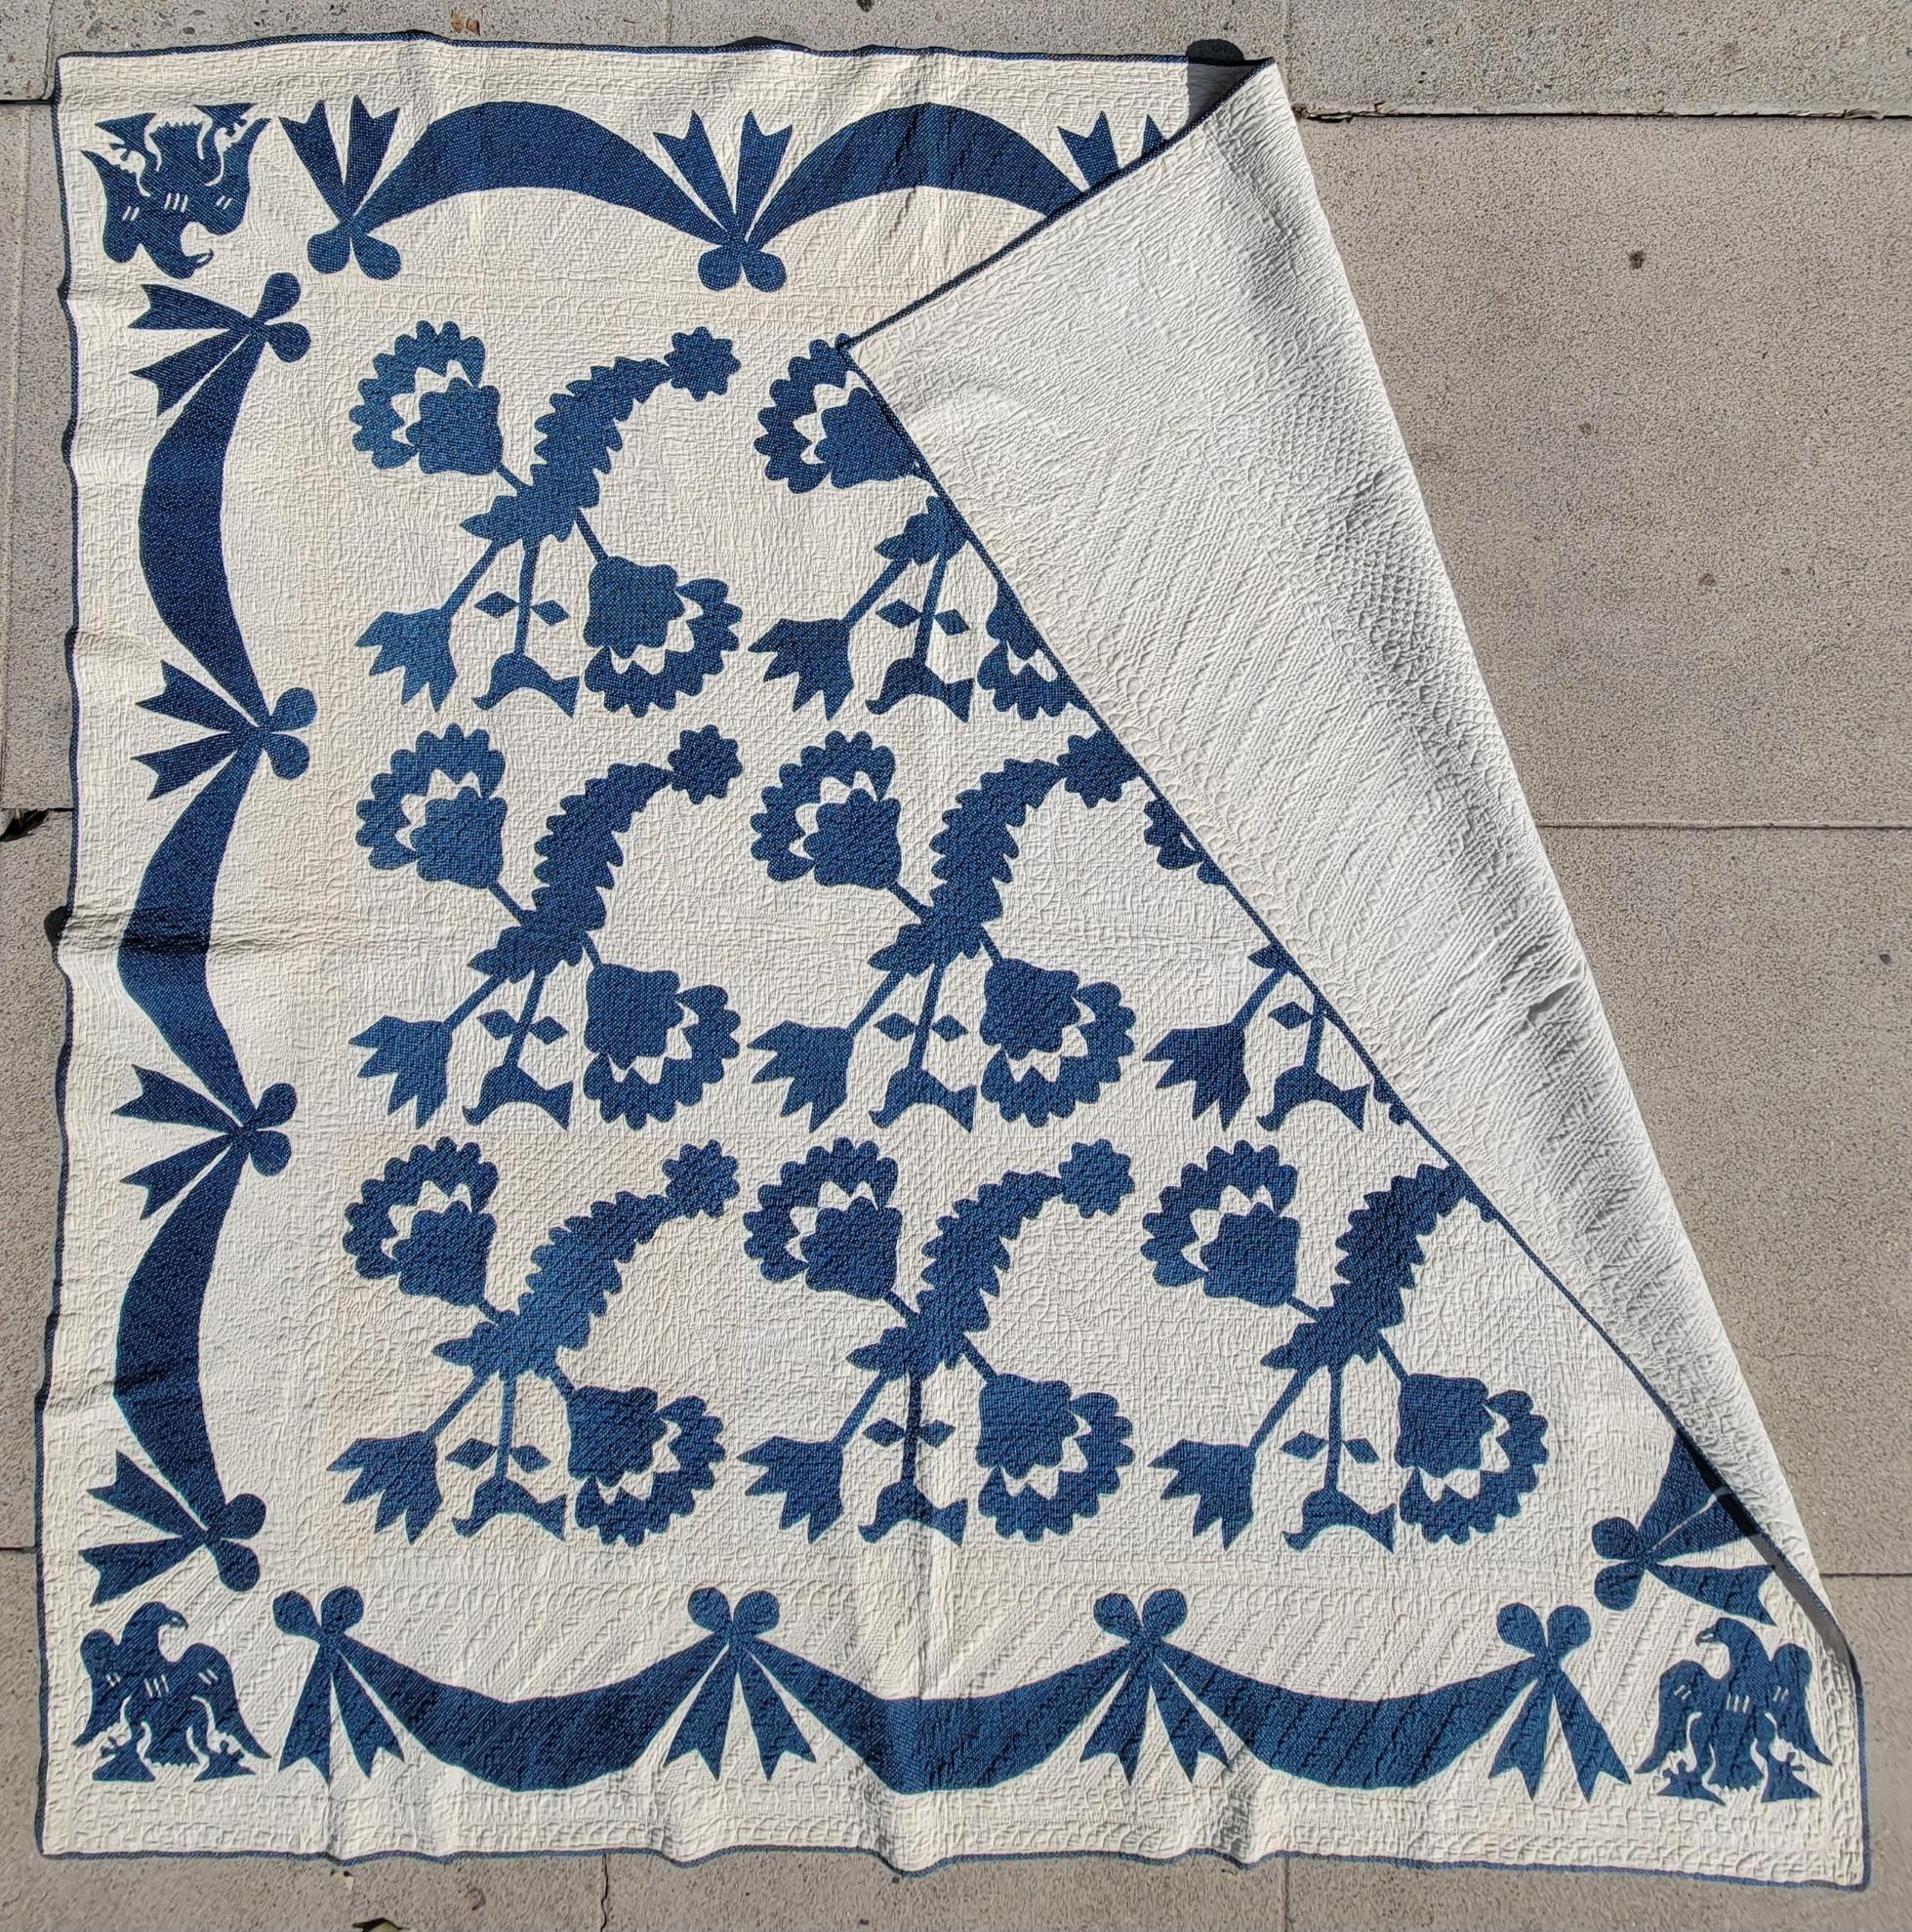 19th century Blue & white floral applique quilt with birds and eagles in all four corners.This early applique is pre -centennial. The condition is very good and the quilting is perfection. The applique work is very tight stitches and very finely